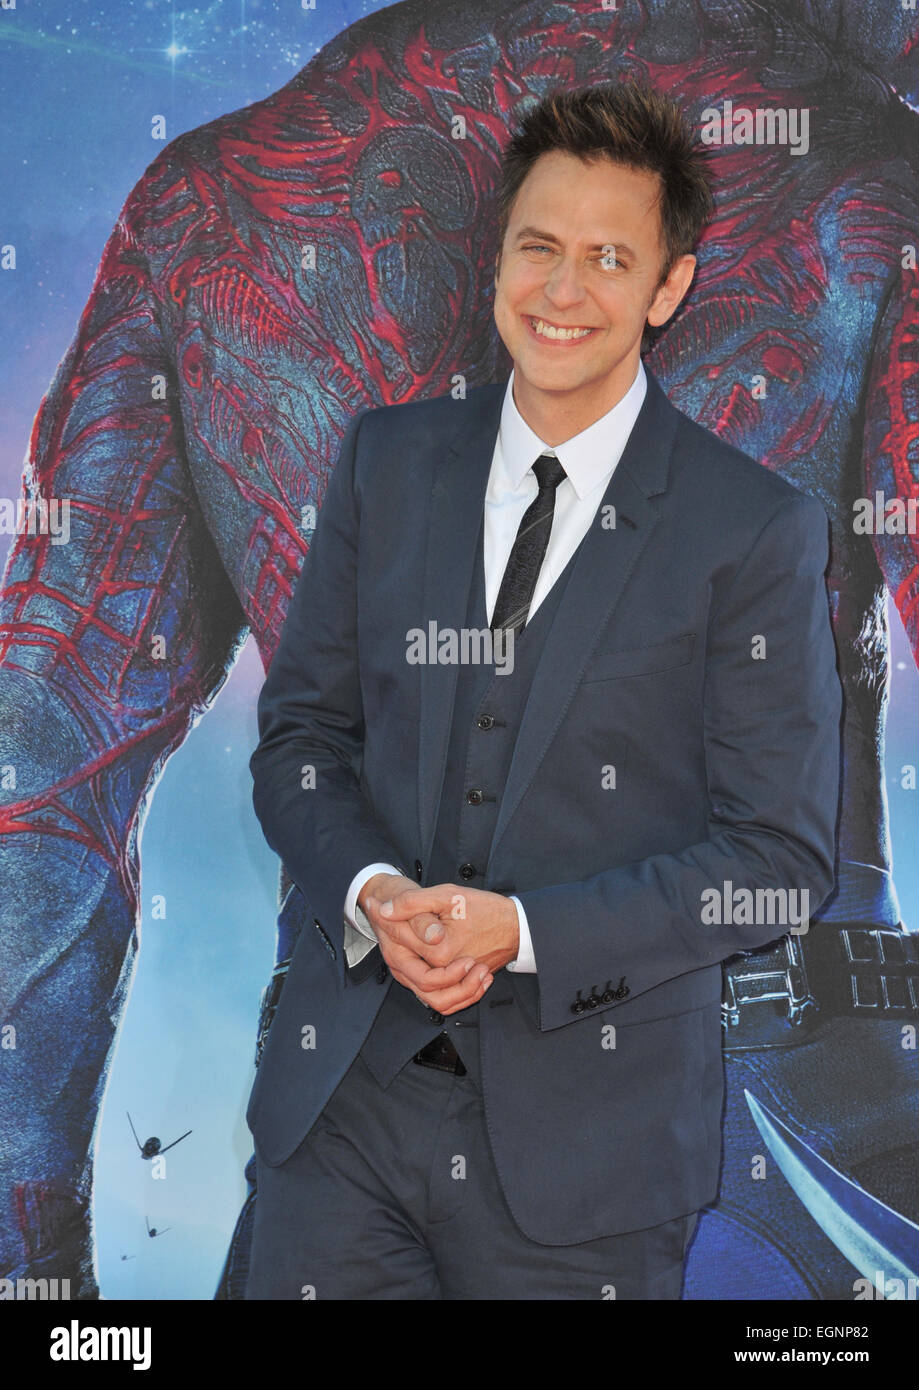 LOS ANGELES, CA - JULY 21, 2014: Director James Gunn at the world premiere of his movie 'Guardians of the Galaxy' at the El Capitan Theatre, Hollywood. Stock Photo